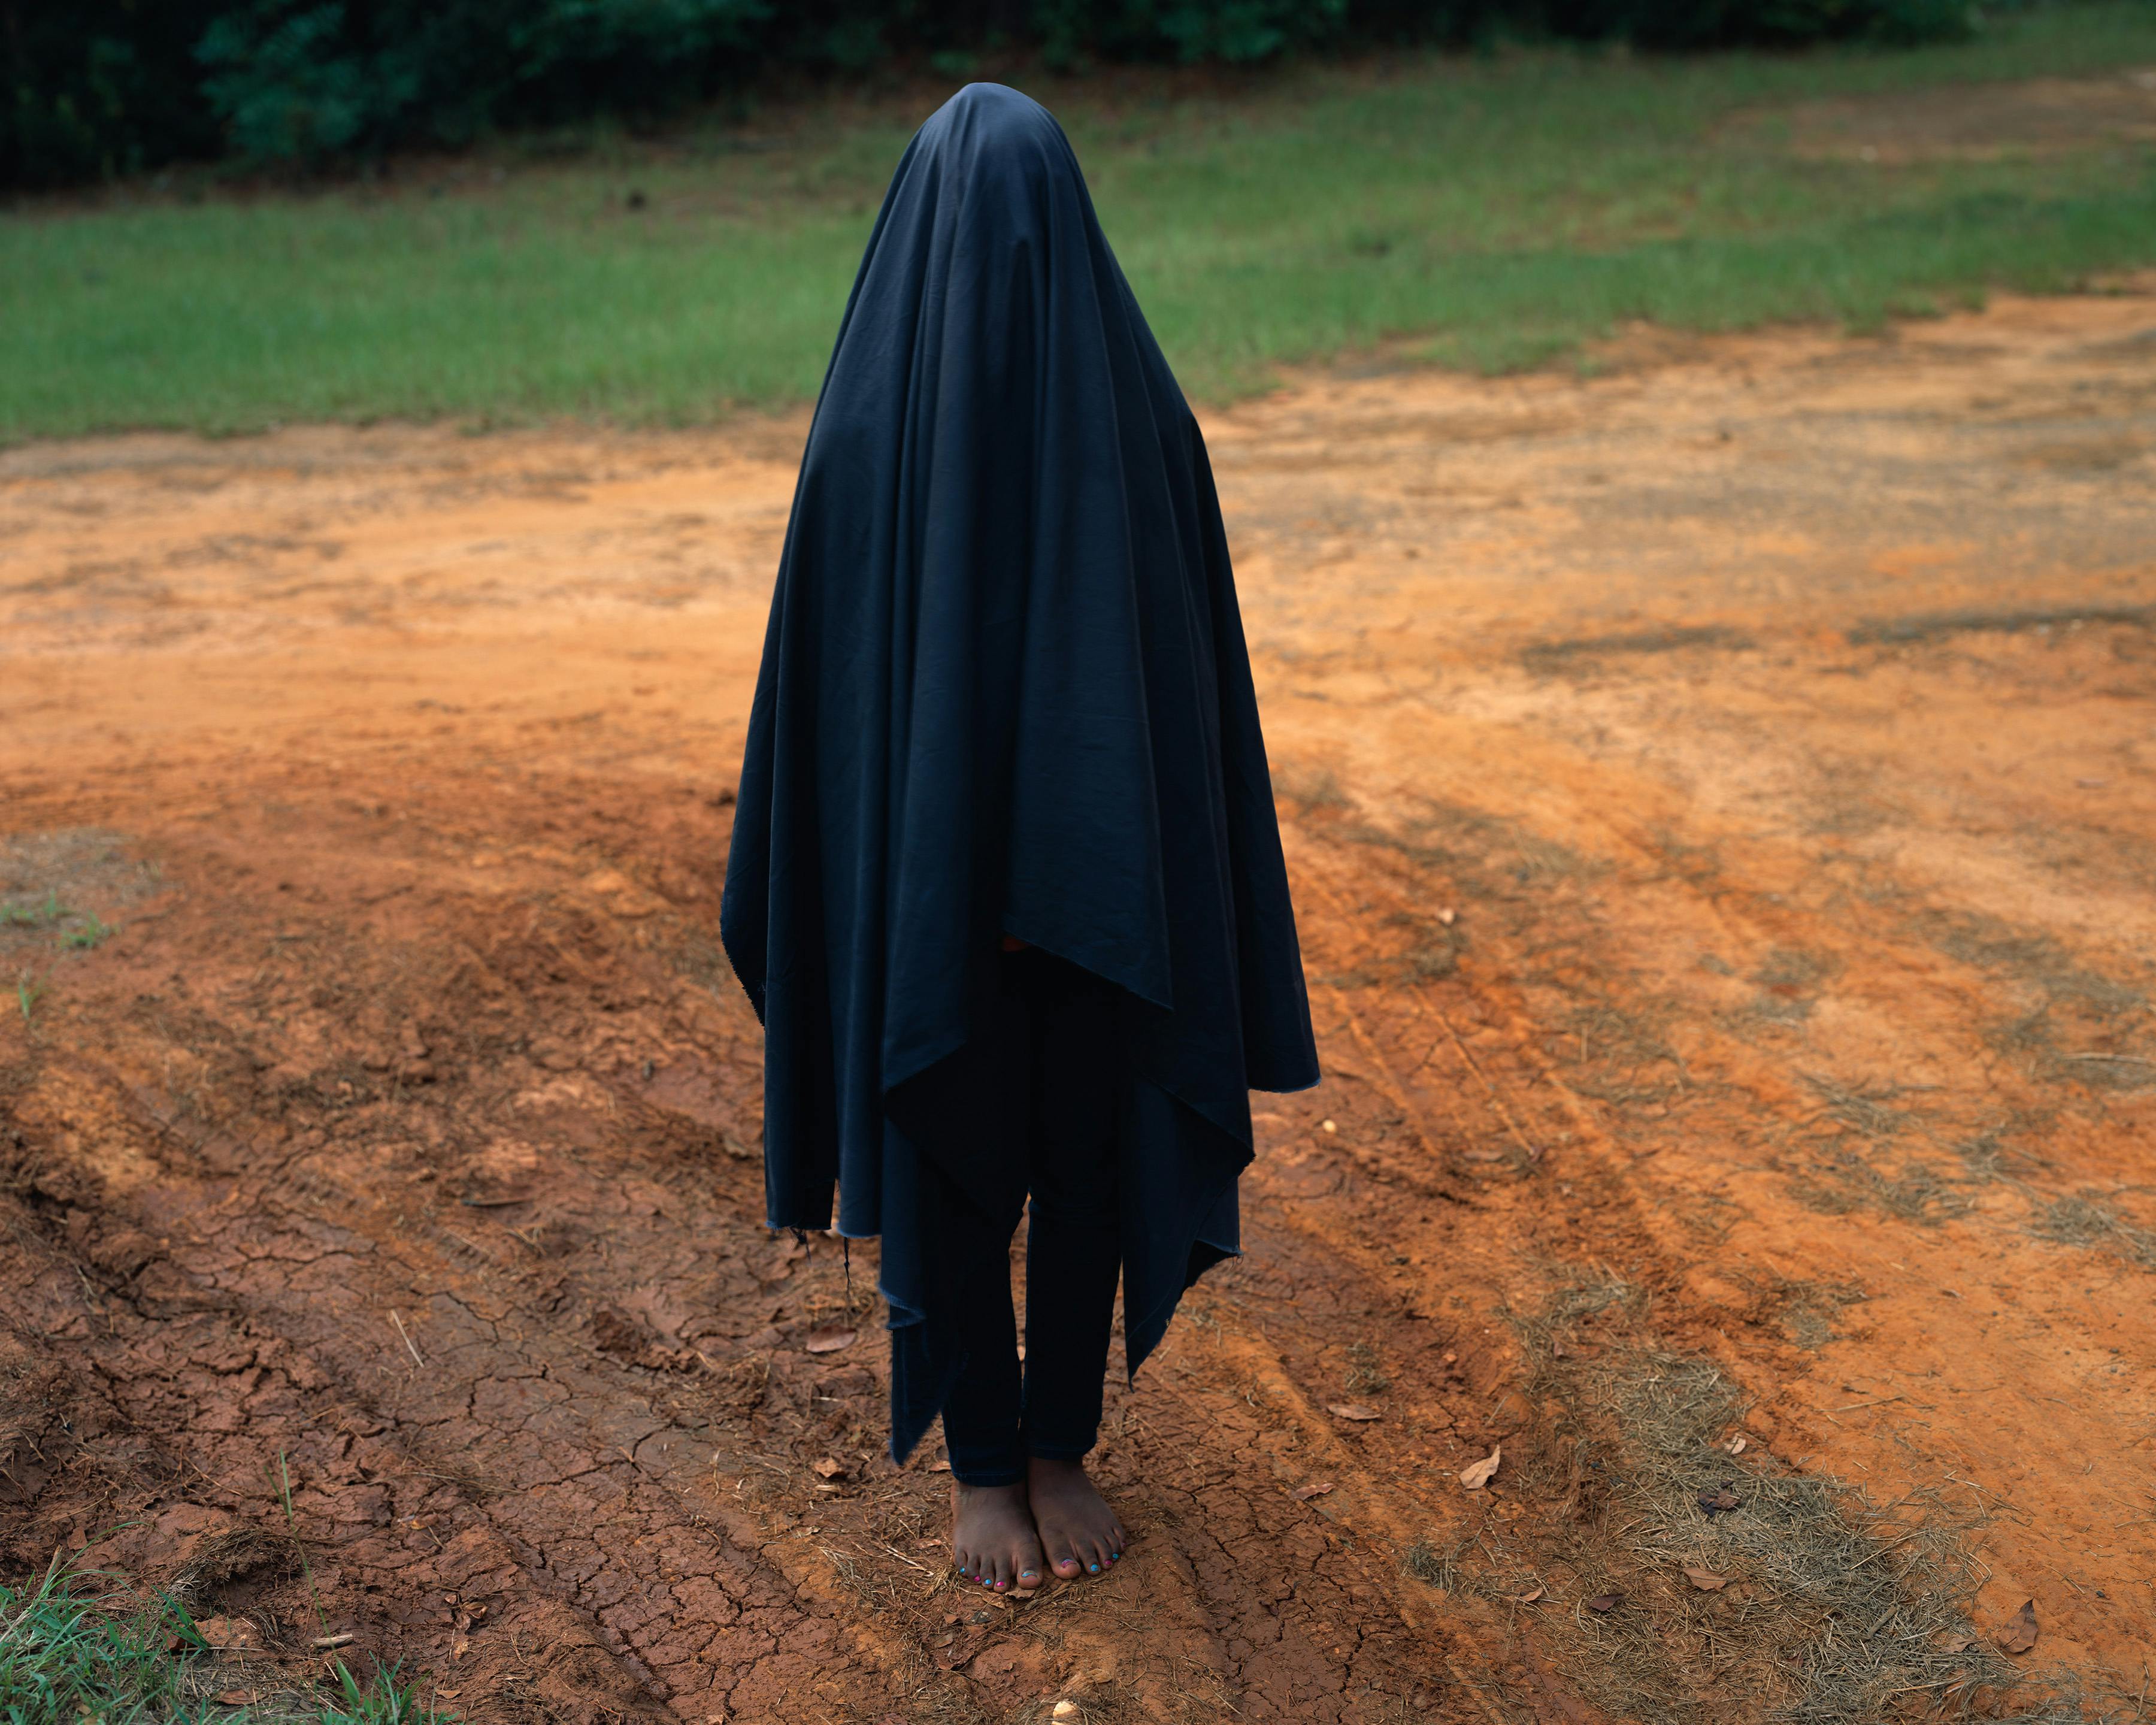 photograph of a person standing in a dirt road barefoot with a black veil covering their entire body